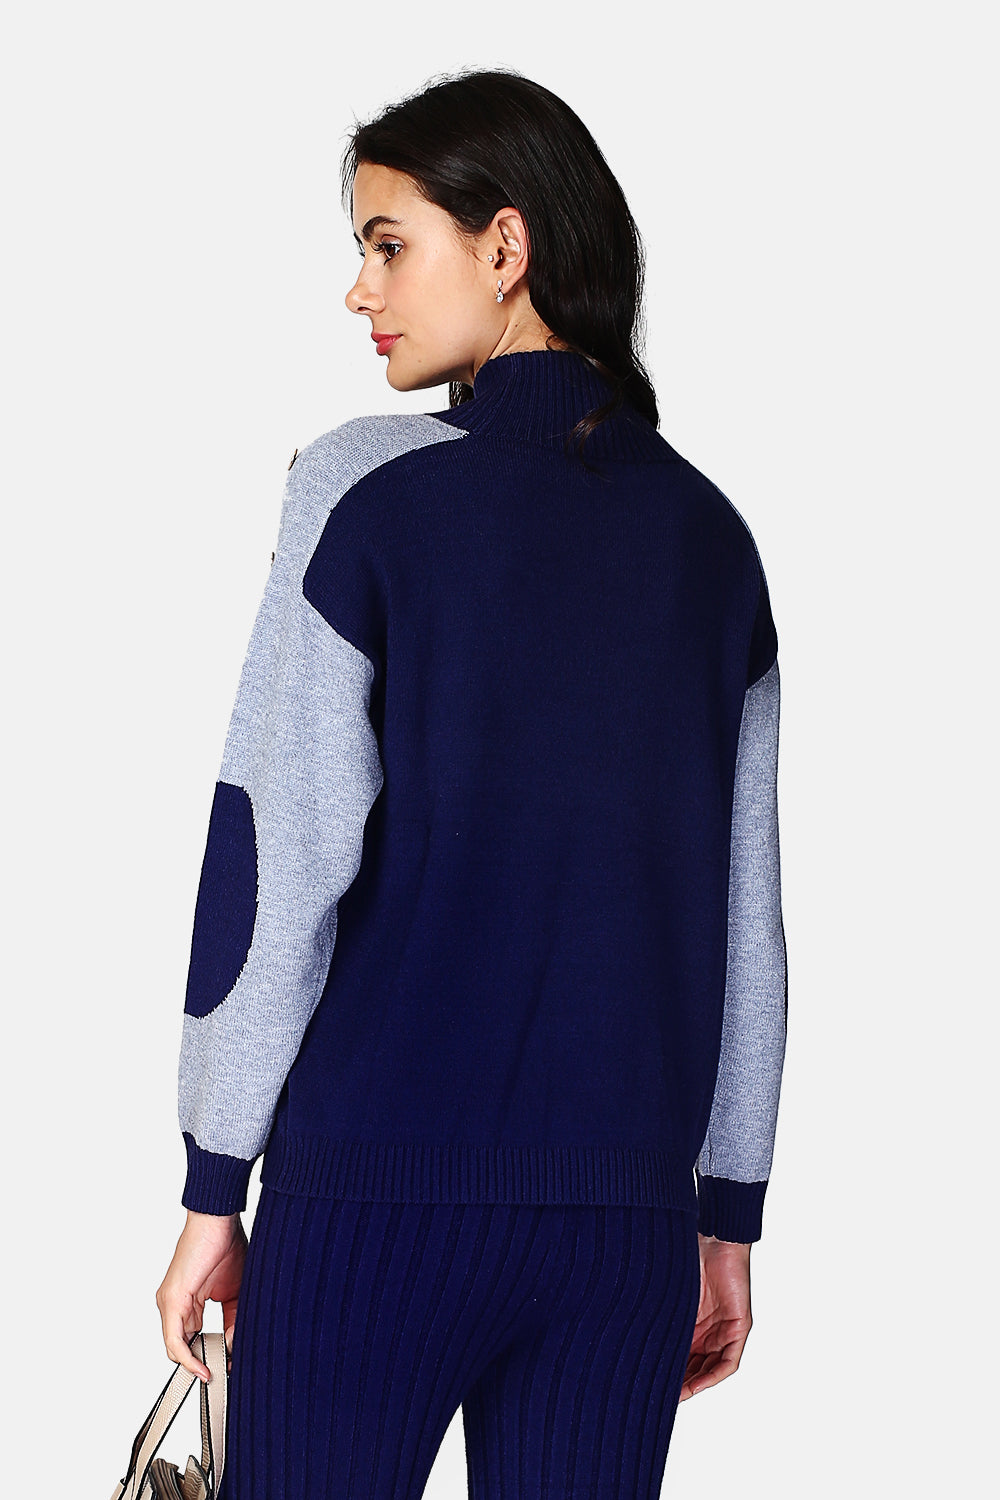 High neck sweater with long sleeves in two colors